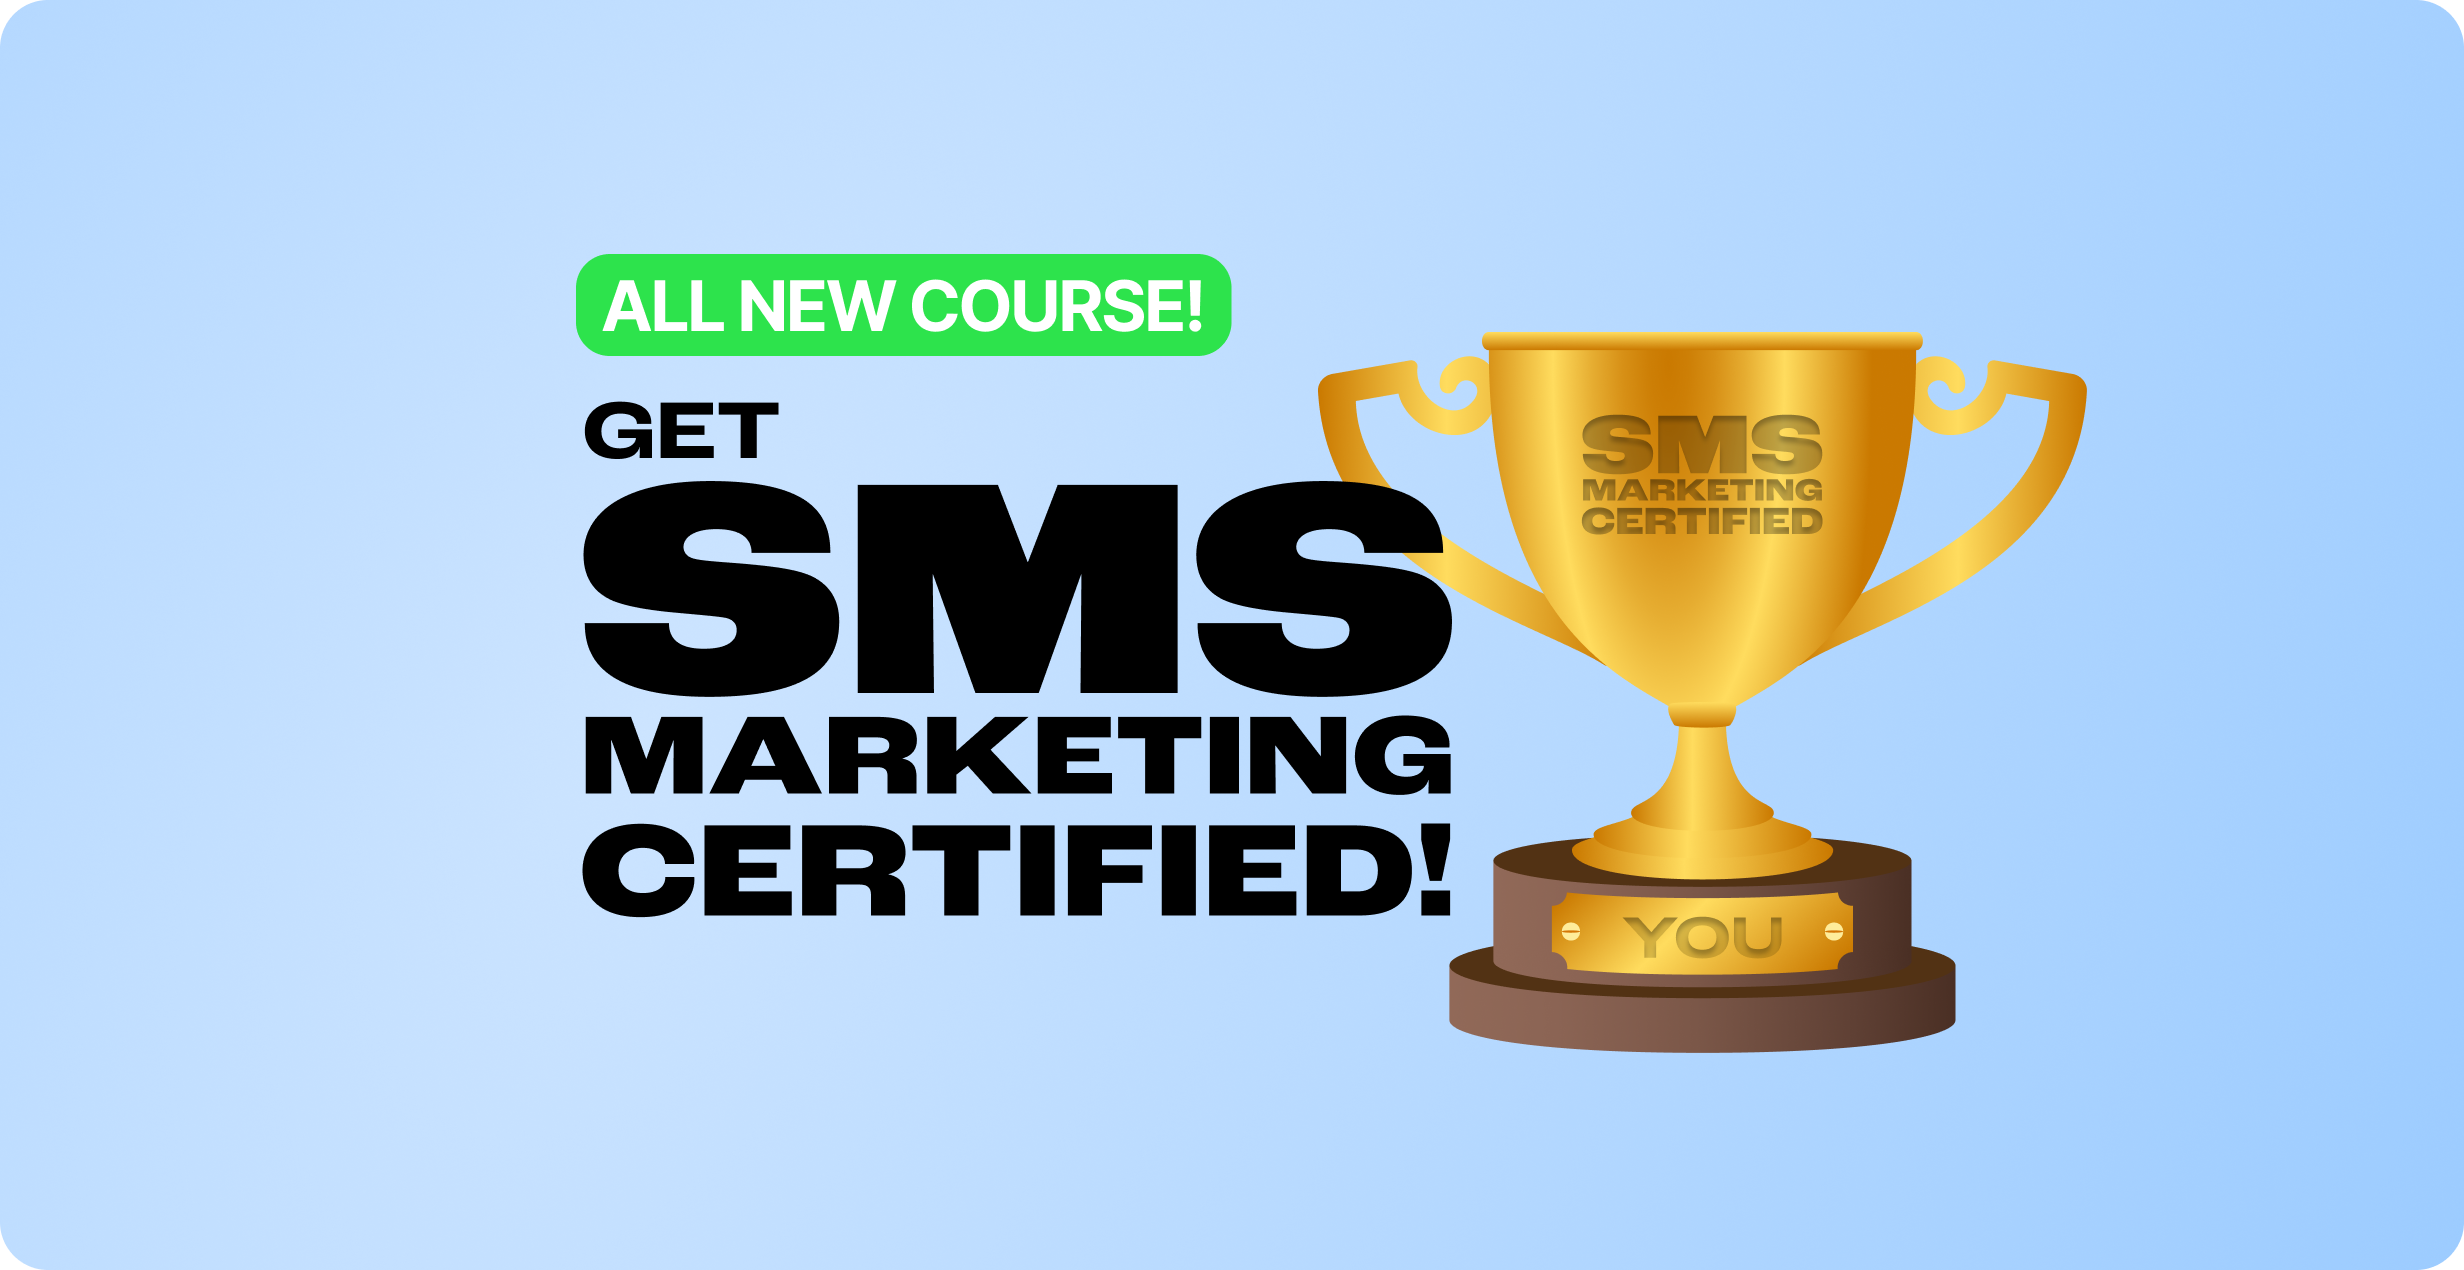 The All-New and Improved SMS Marketing Certification is Here